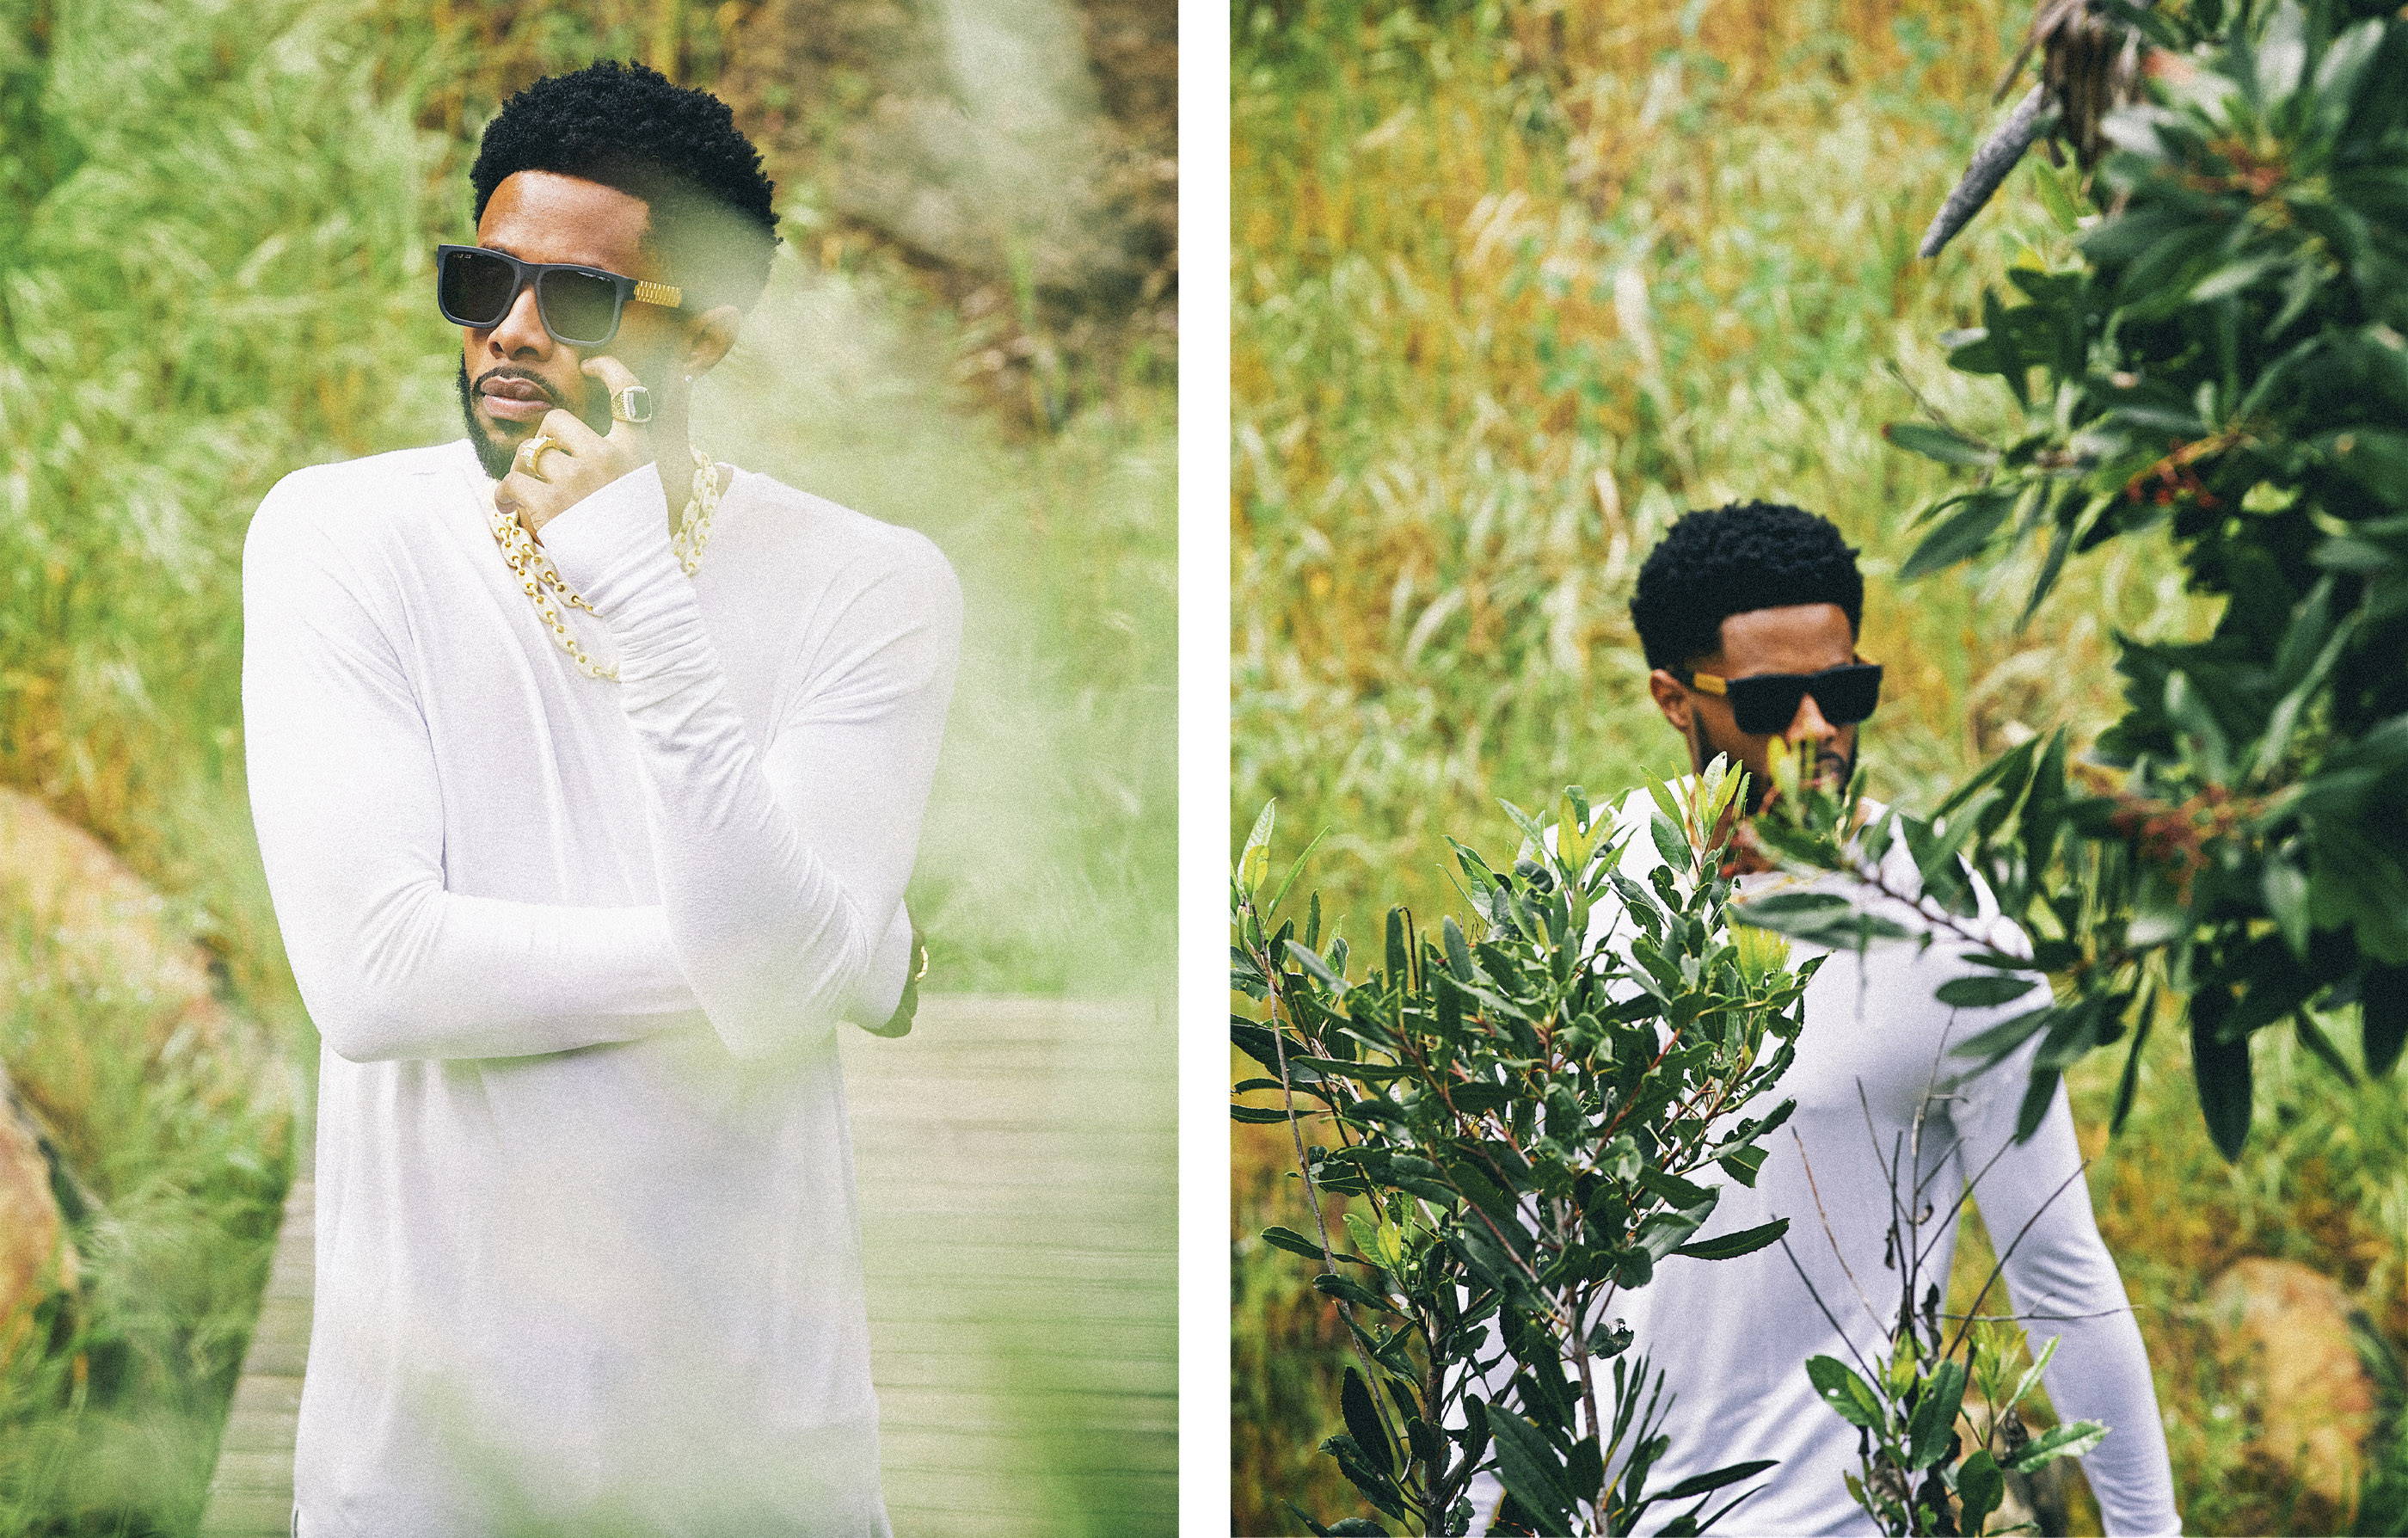 King Ice Shades Collection with Larry Drew II. Photographed by ceethreedom